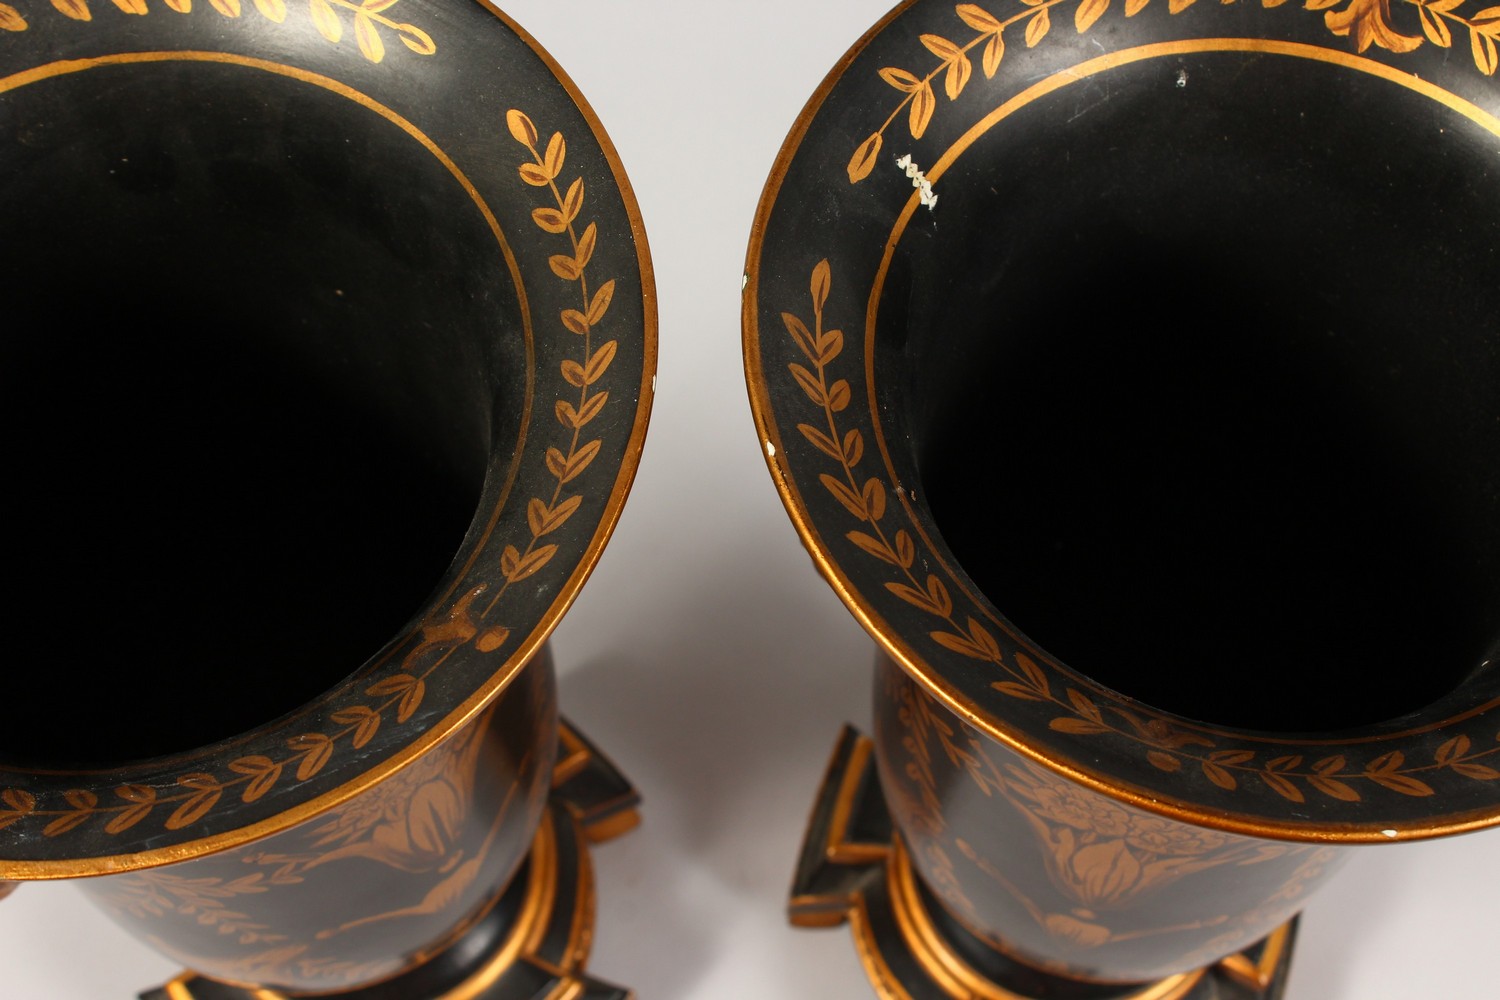 A PAIR OF BLACK PORCELAIN TOLEWARE TYPE URNS ON STANDS. 13ins high. - Image 3 of 3